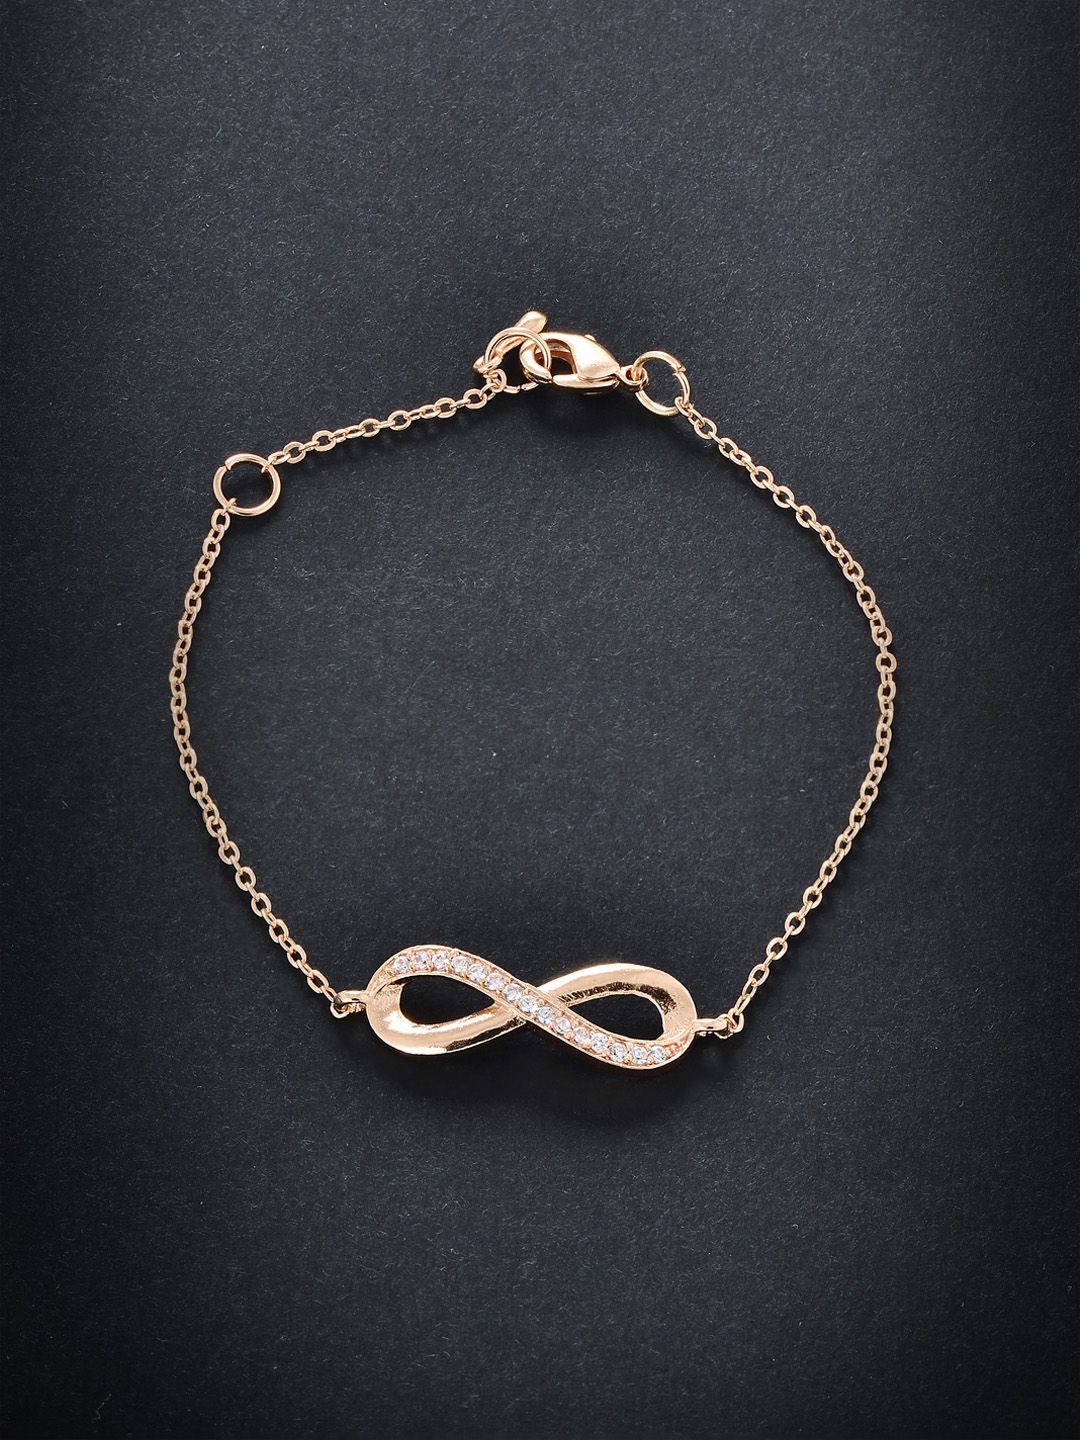 MINUTIAE Women Brass Crystals Handcrafted Rose Gold-Plated Infinity Link Bracelet Price in India